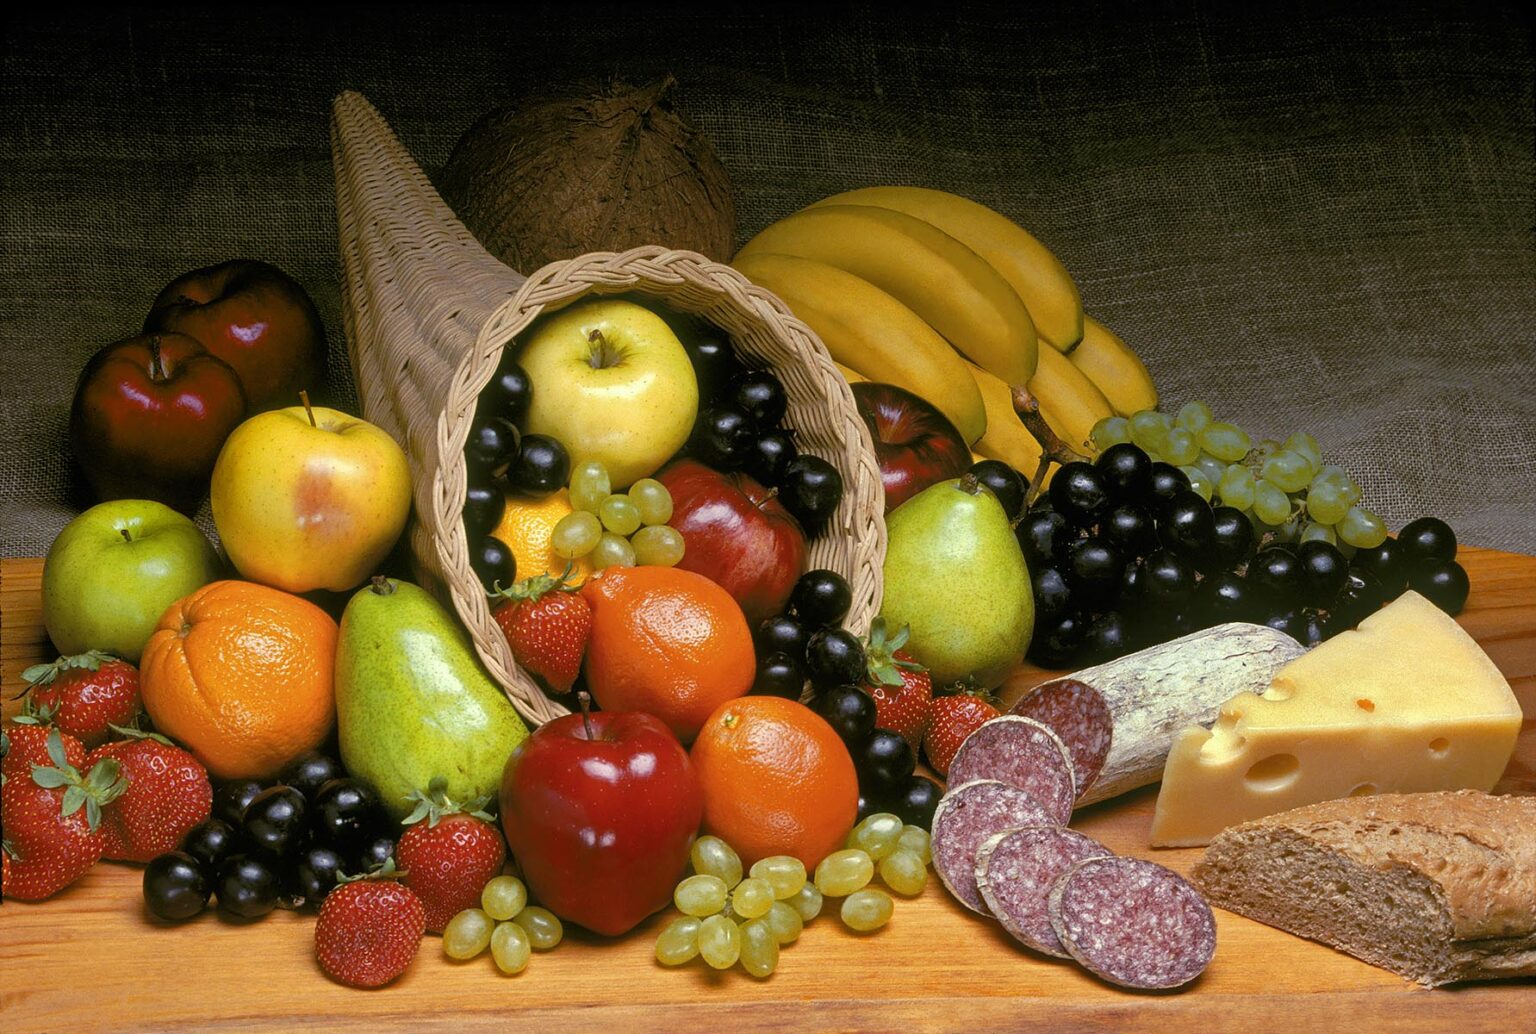 CORNUCOPIA of fruit with apple, pear, strawberries, bananas, oranges, tangelos and Italian salami, Swiss cheese and bread